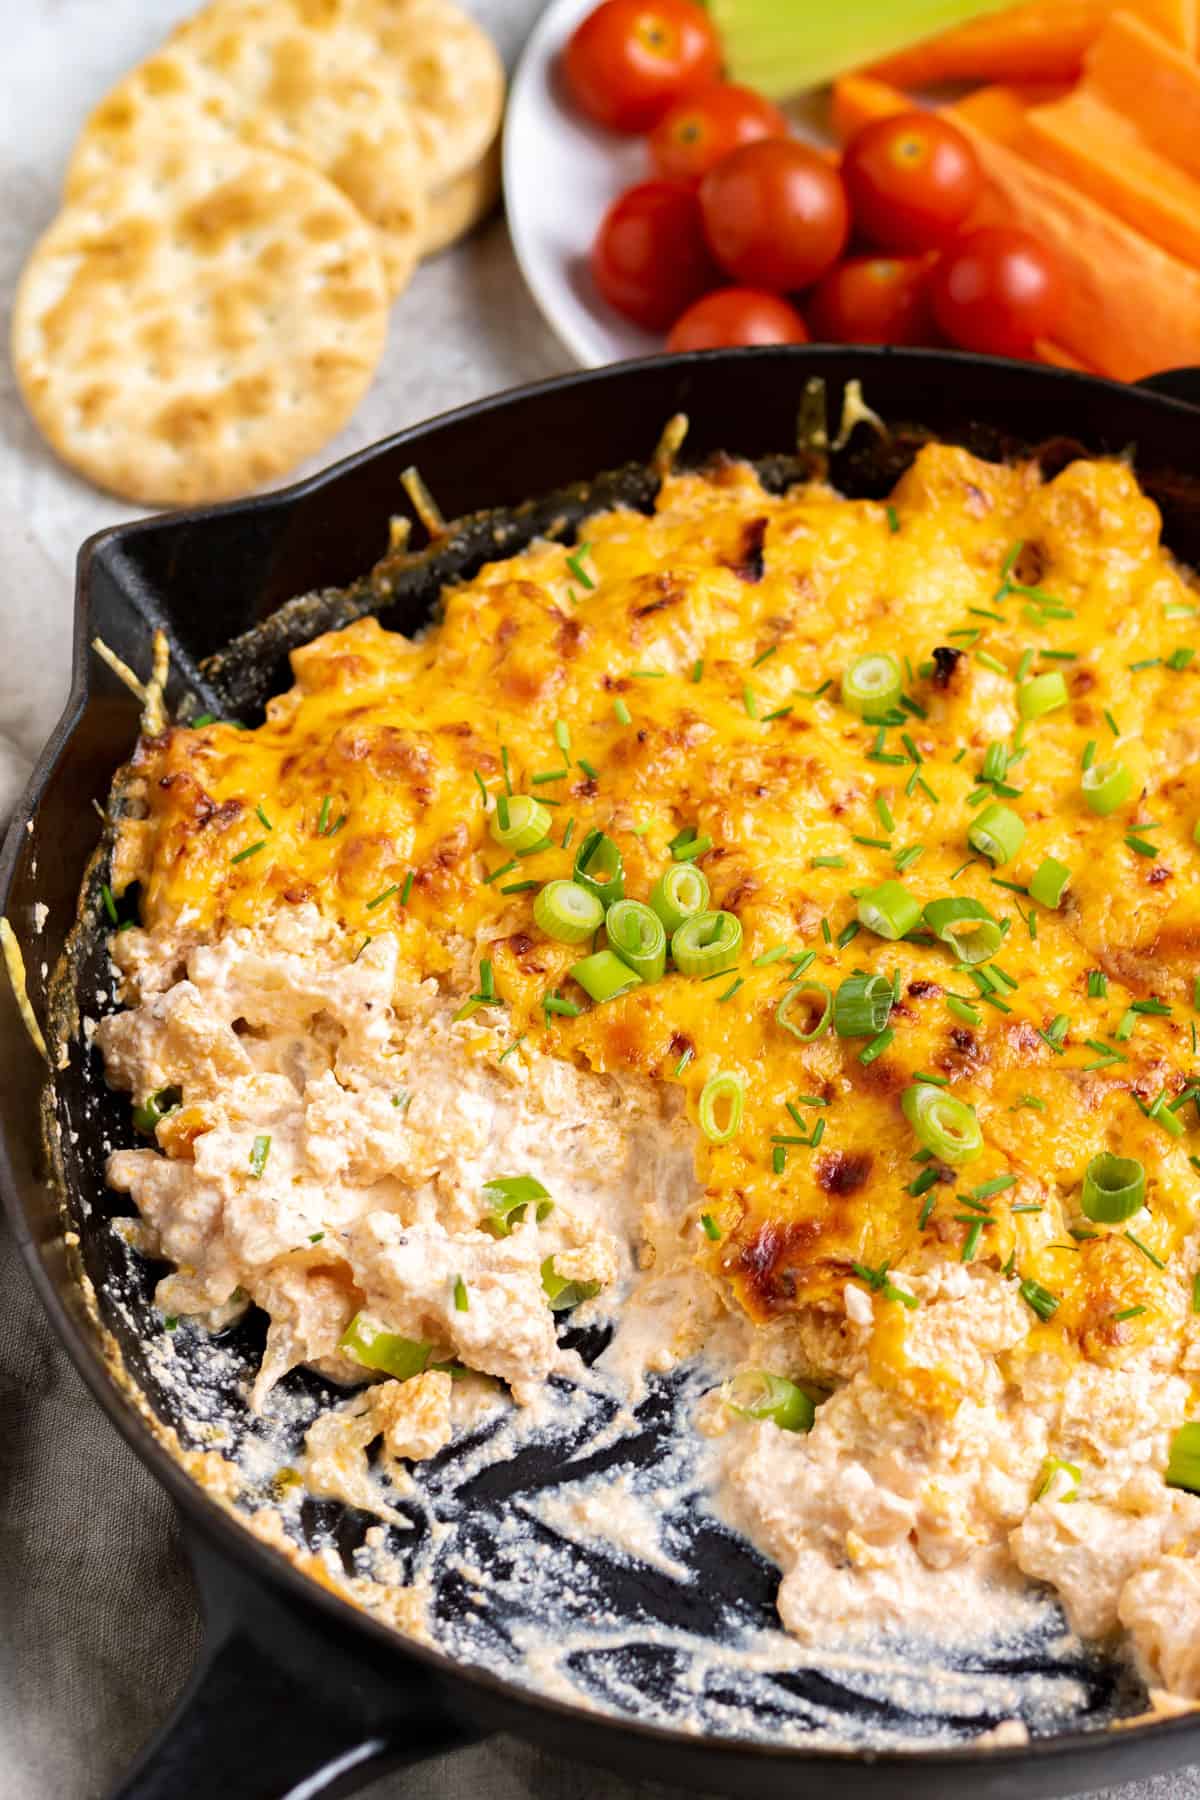 Skillet of buffalo cauliflower dip surrounded by veggies and crackers.